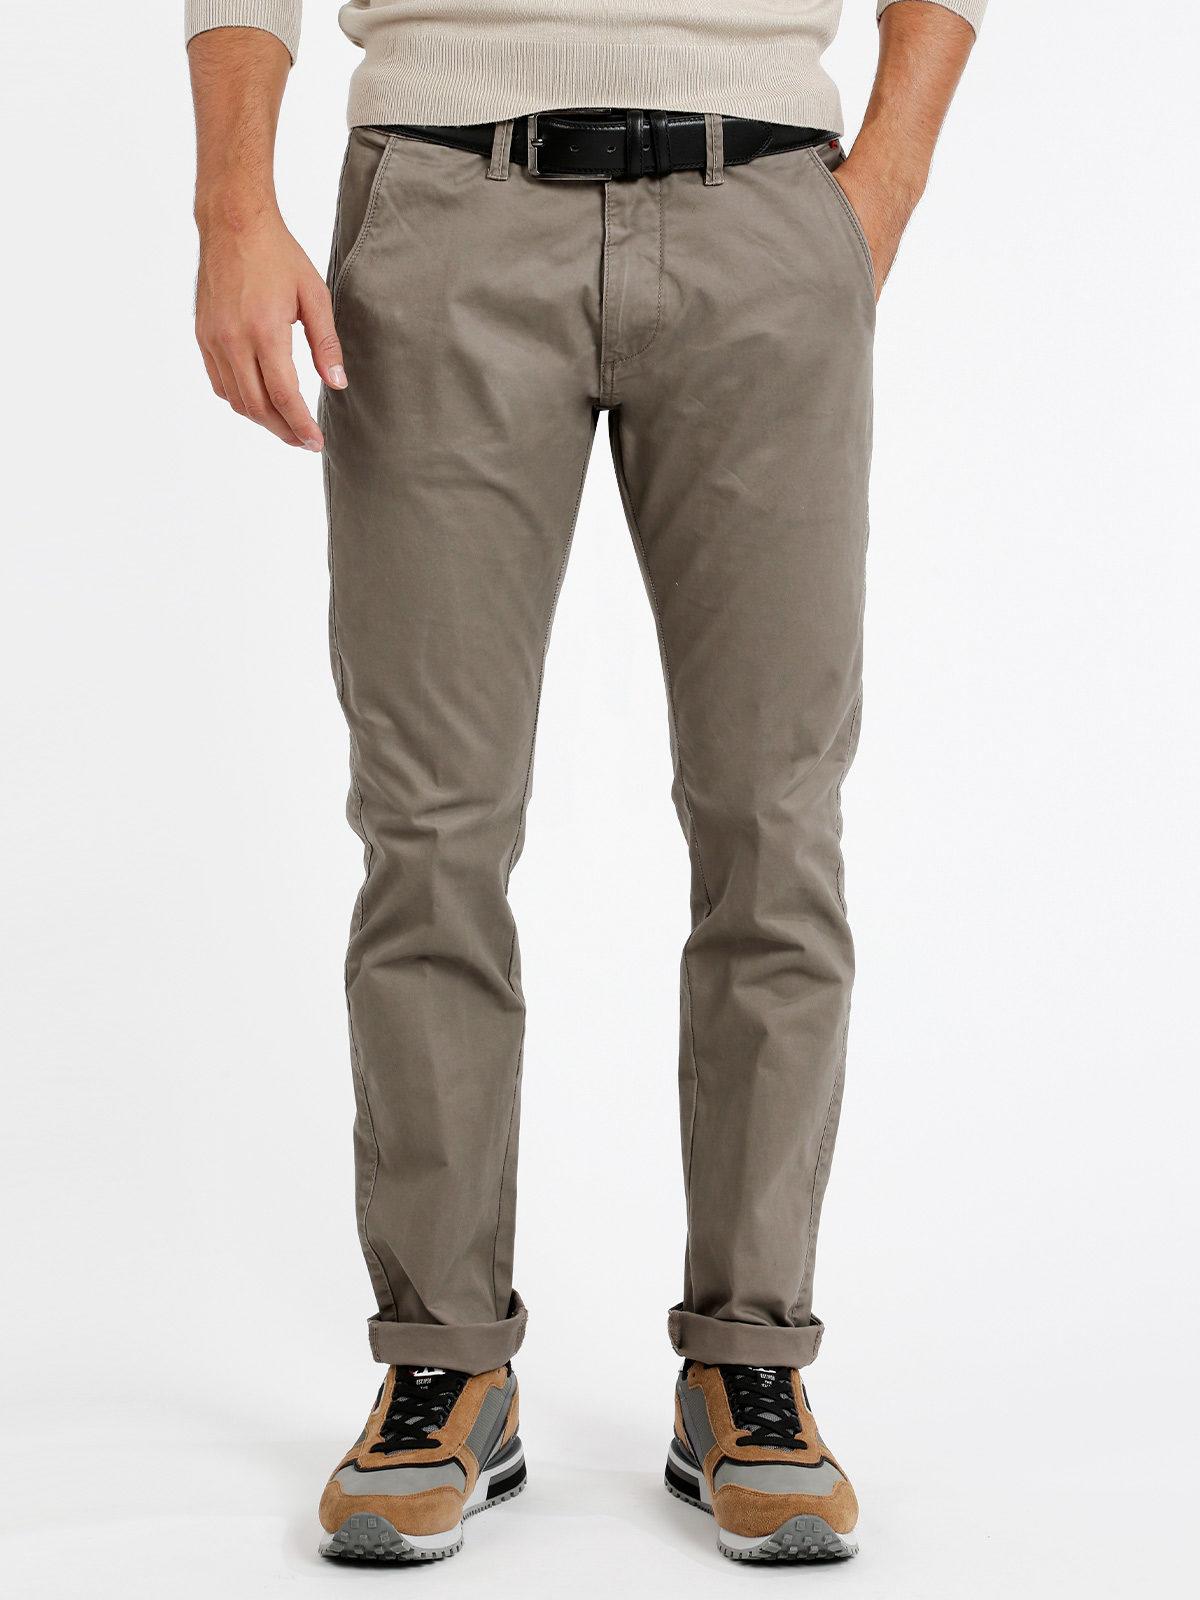 Guy Super slim men's trousers: for sale at 39.99€ on Mecshopping.it